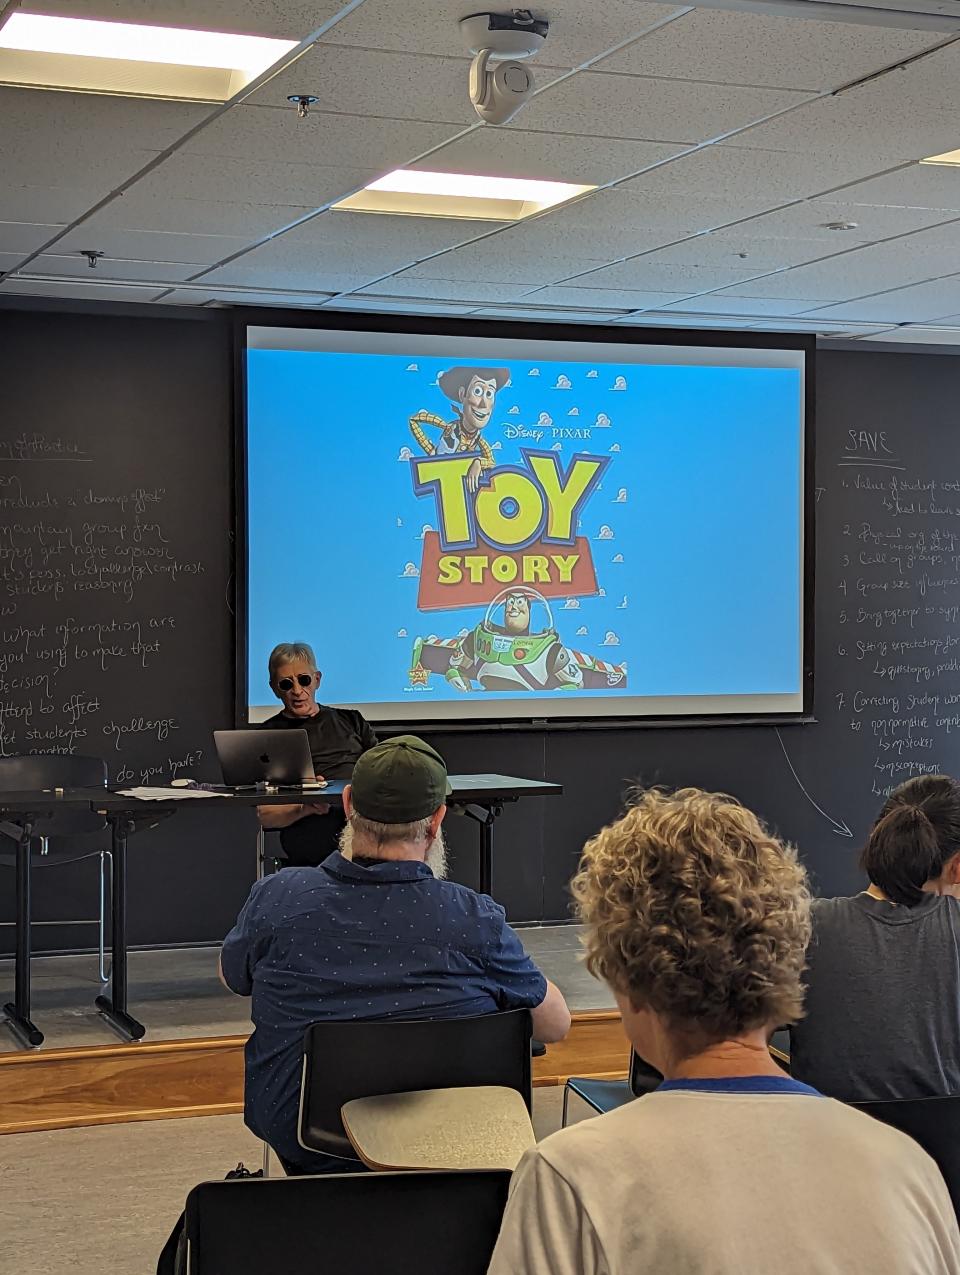 At Harvard over the summer, college professors rethinking calculus instruction participated in sessions involving real-life applications of calculus, including how animation teams use modeling techniques for hits like “Frozen,” “Brave” and “Toy Story.”